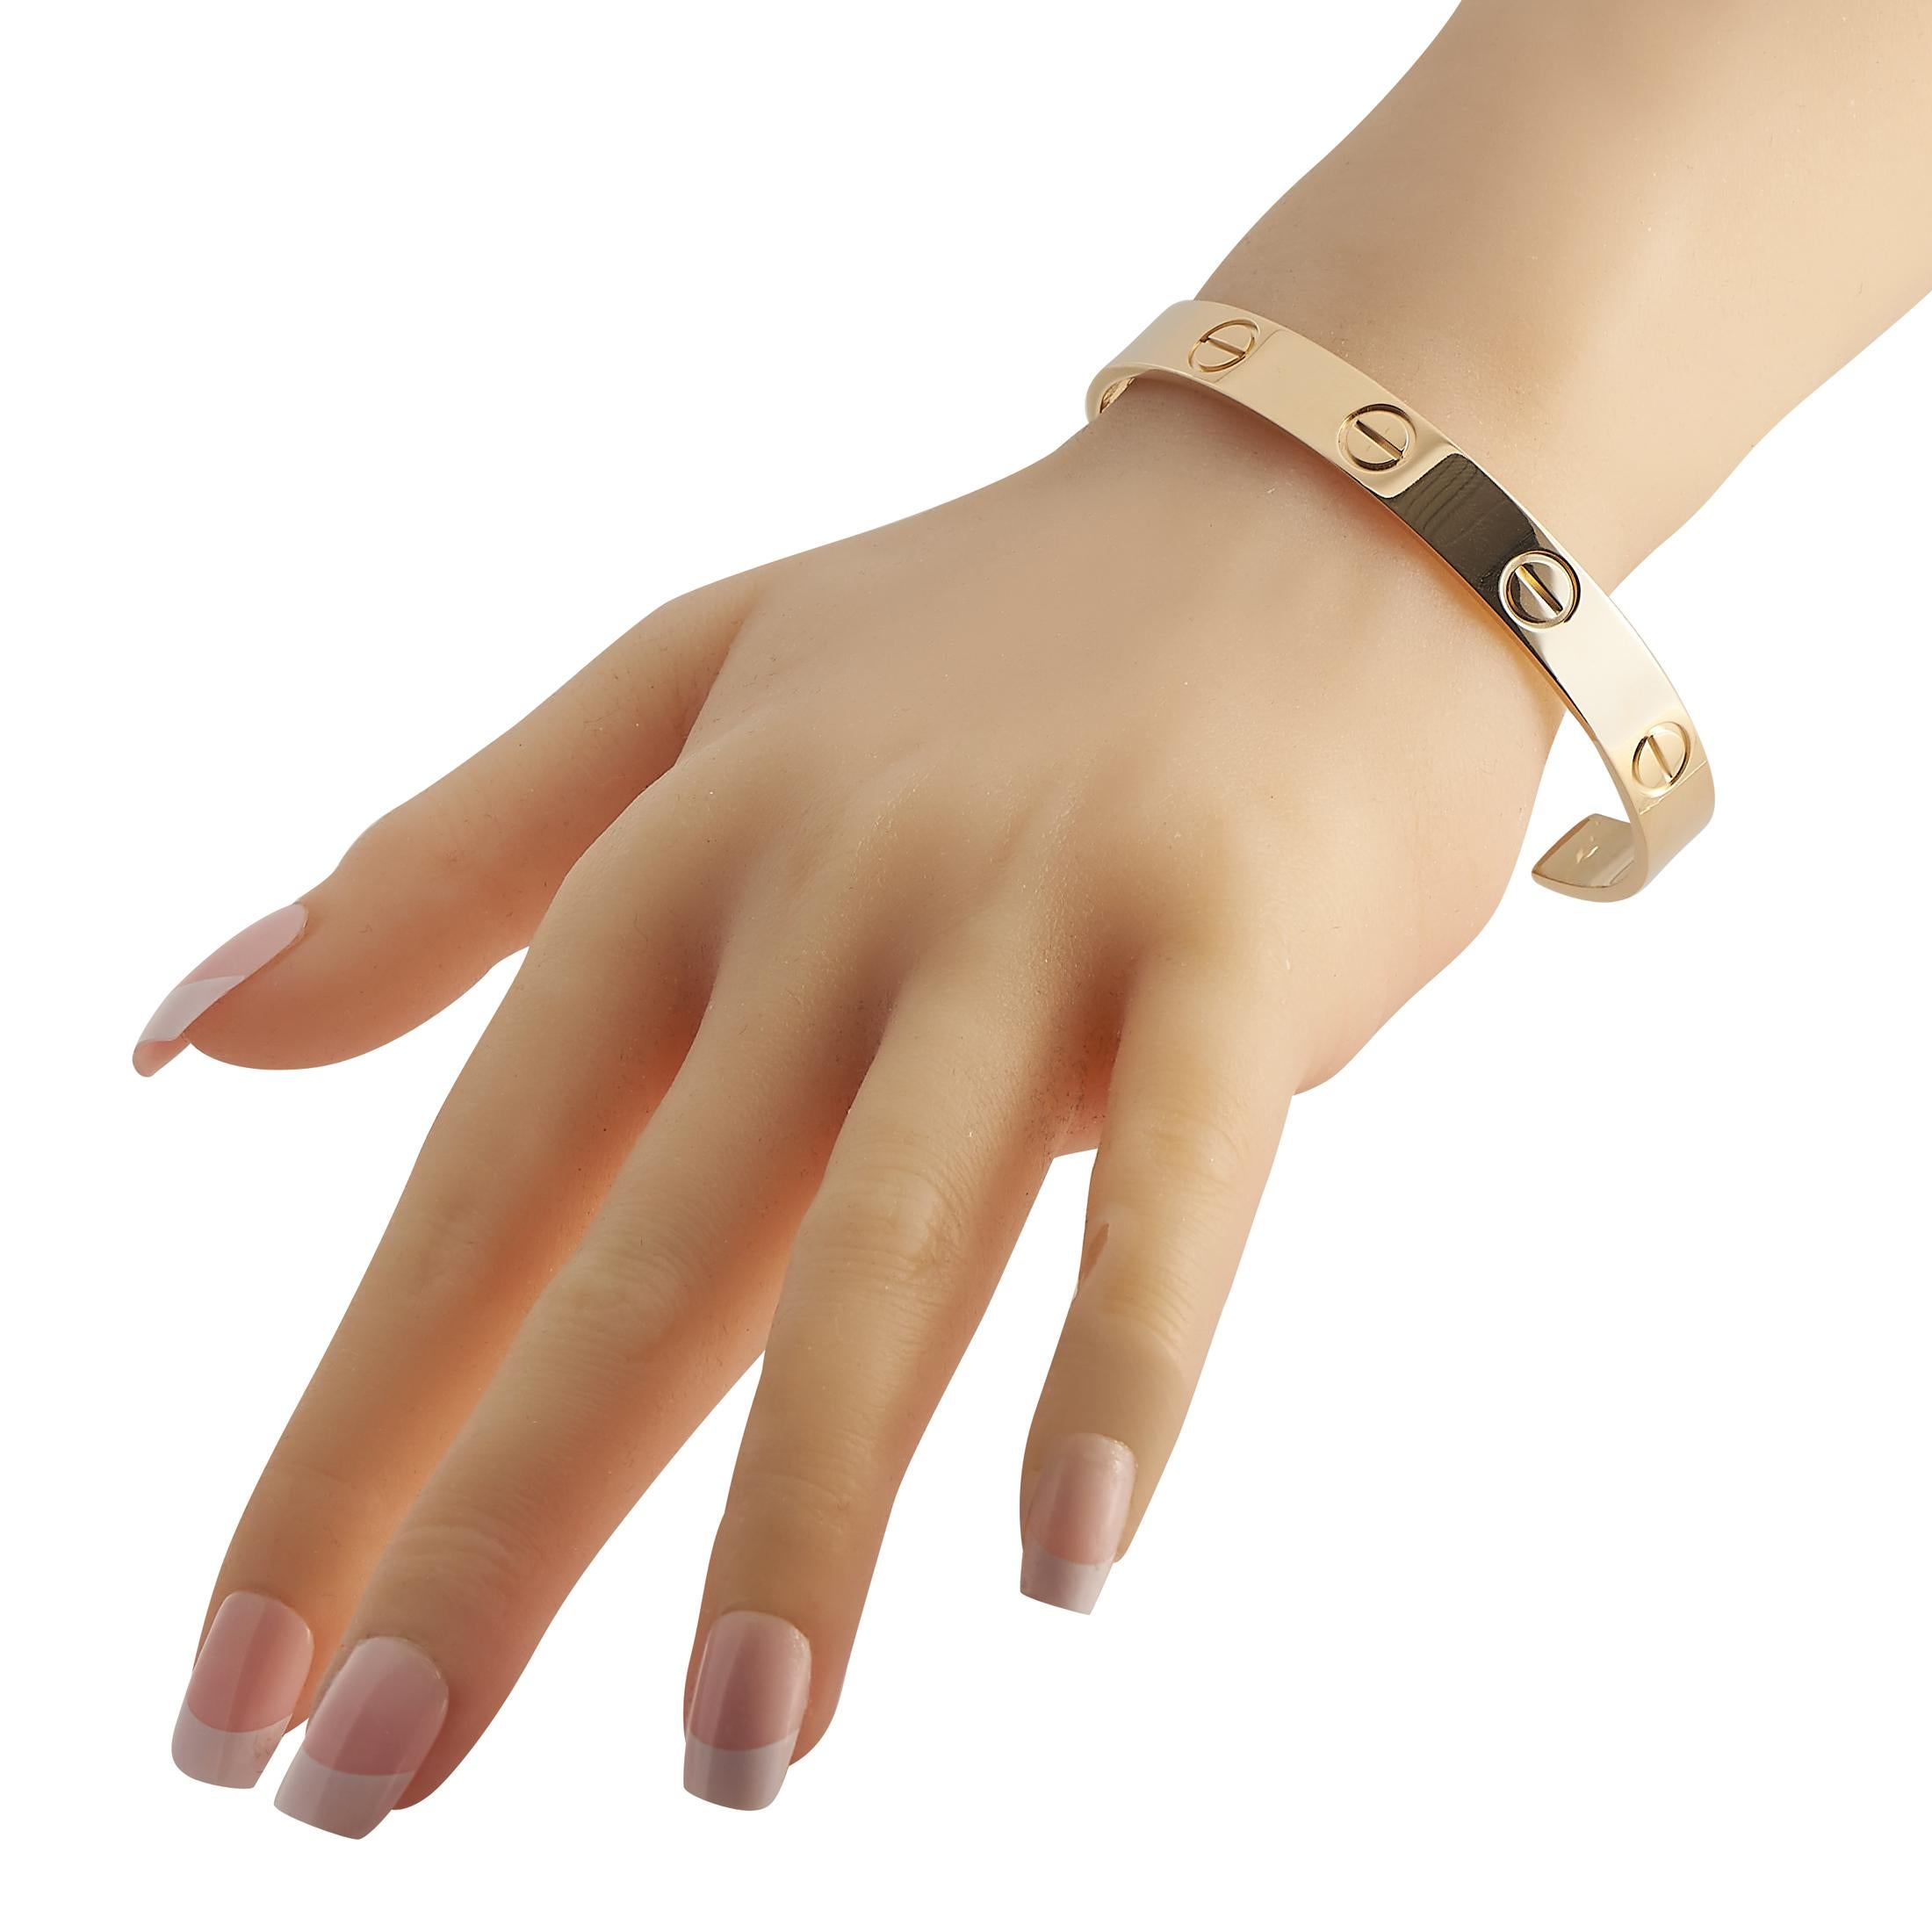 This Cartier LOVE cuff bracelet will add a touch of luxury to any ensemble. Made from opulent 18K Yellow Gold, it features the brands iconic motifs engraved around the perimeter of the design. This Size 20 bracelet measures 7.9 long.This jewelry